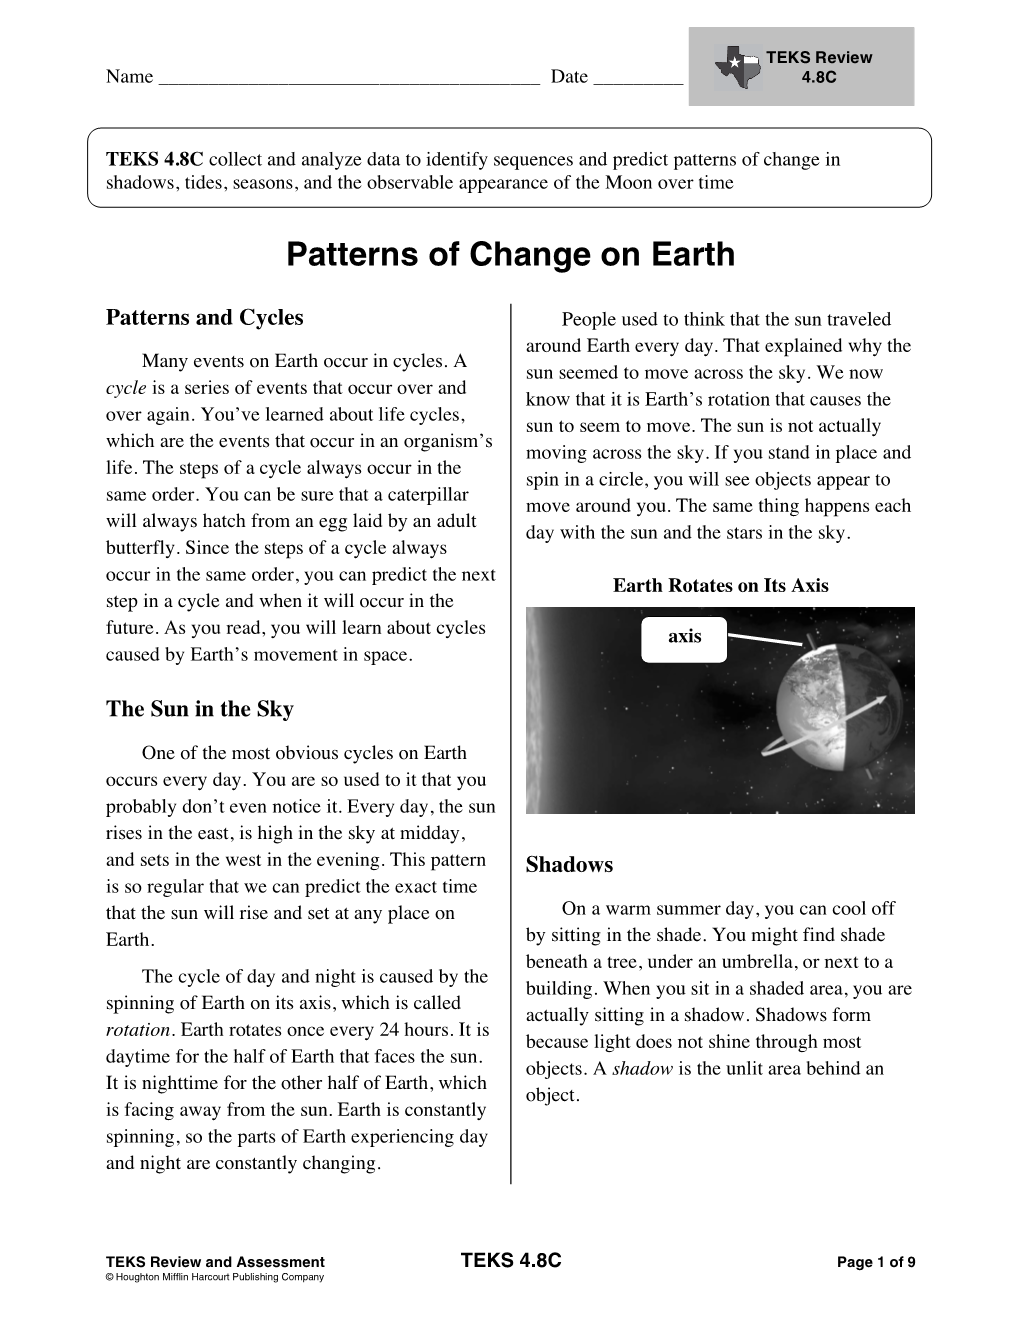 Patterns of Change on Earth